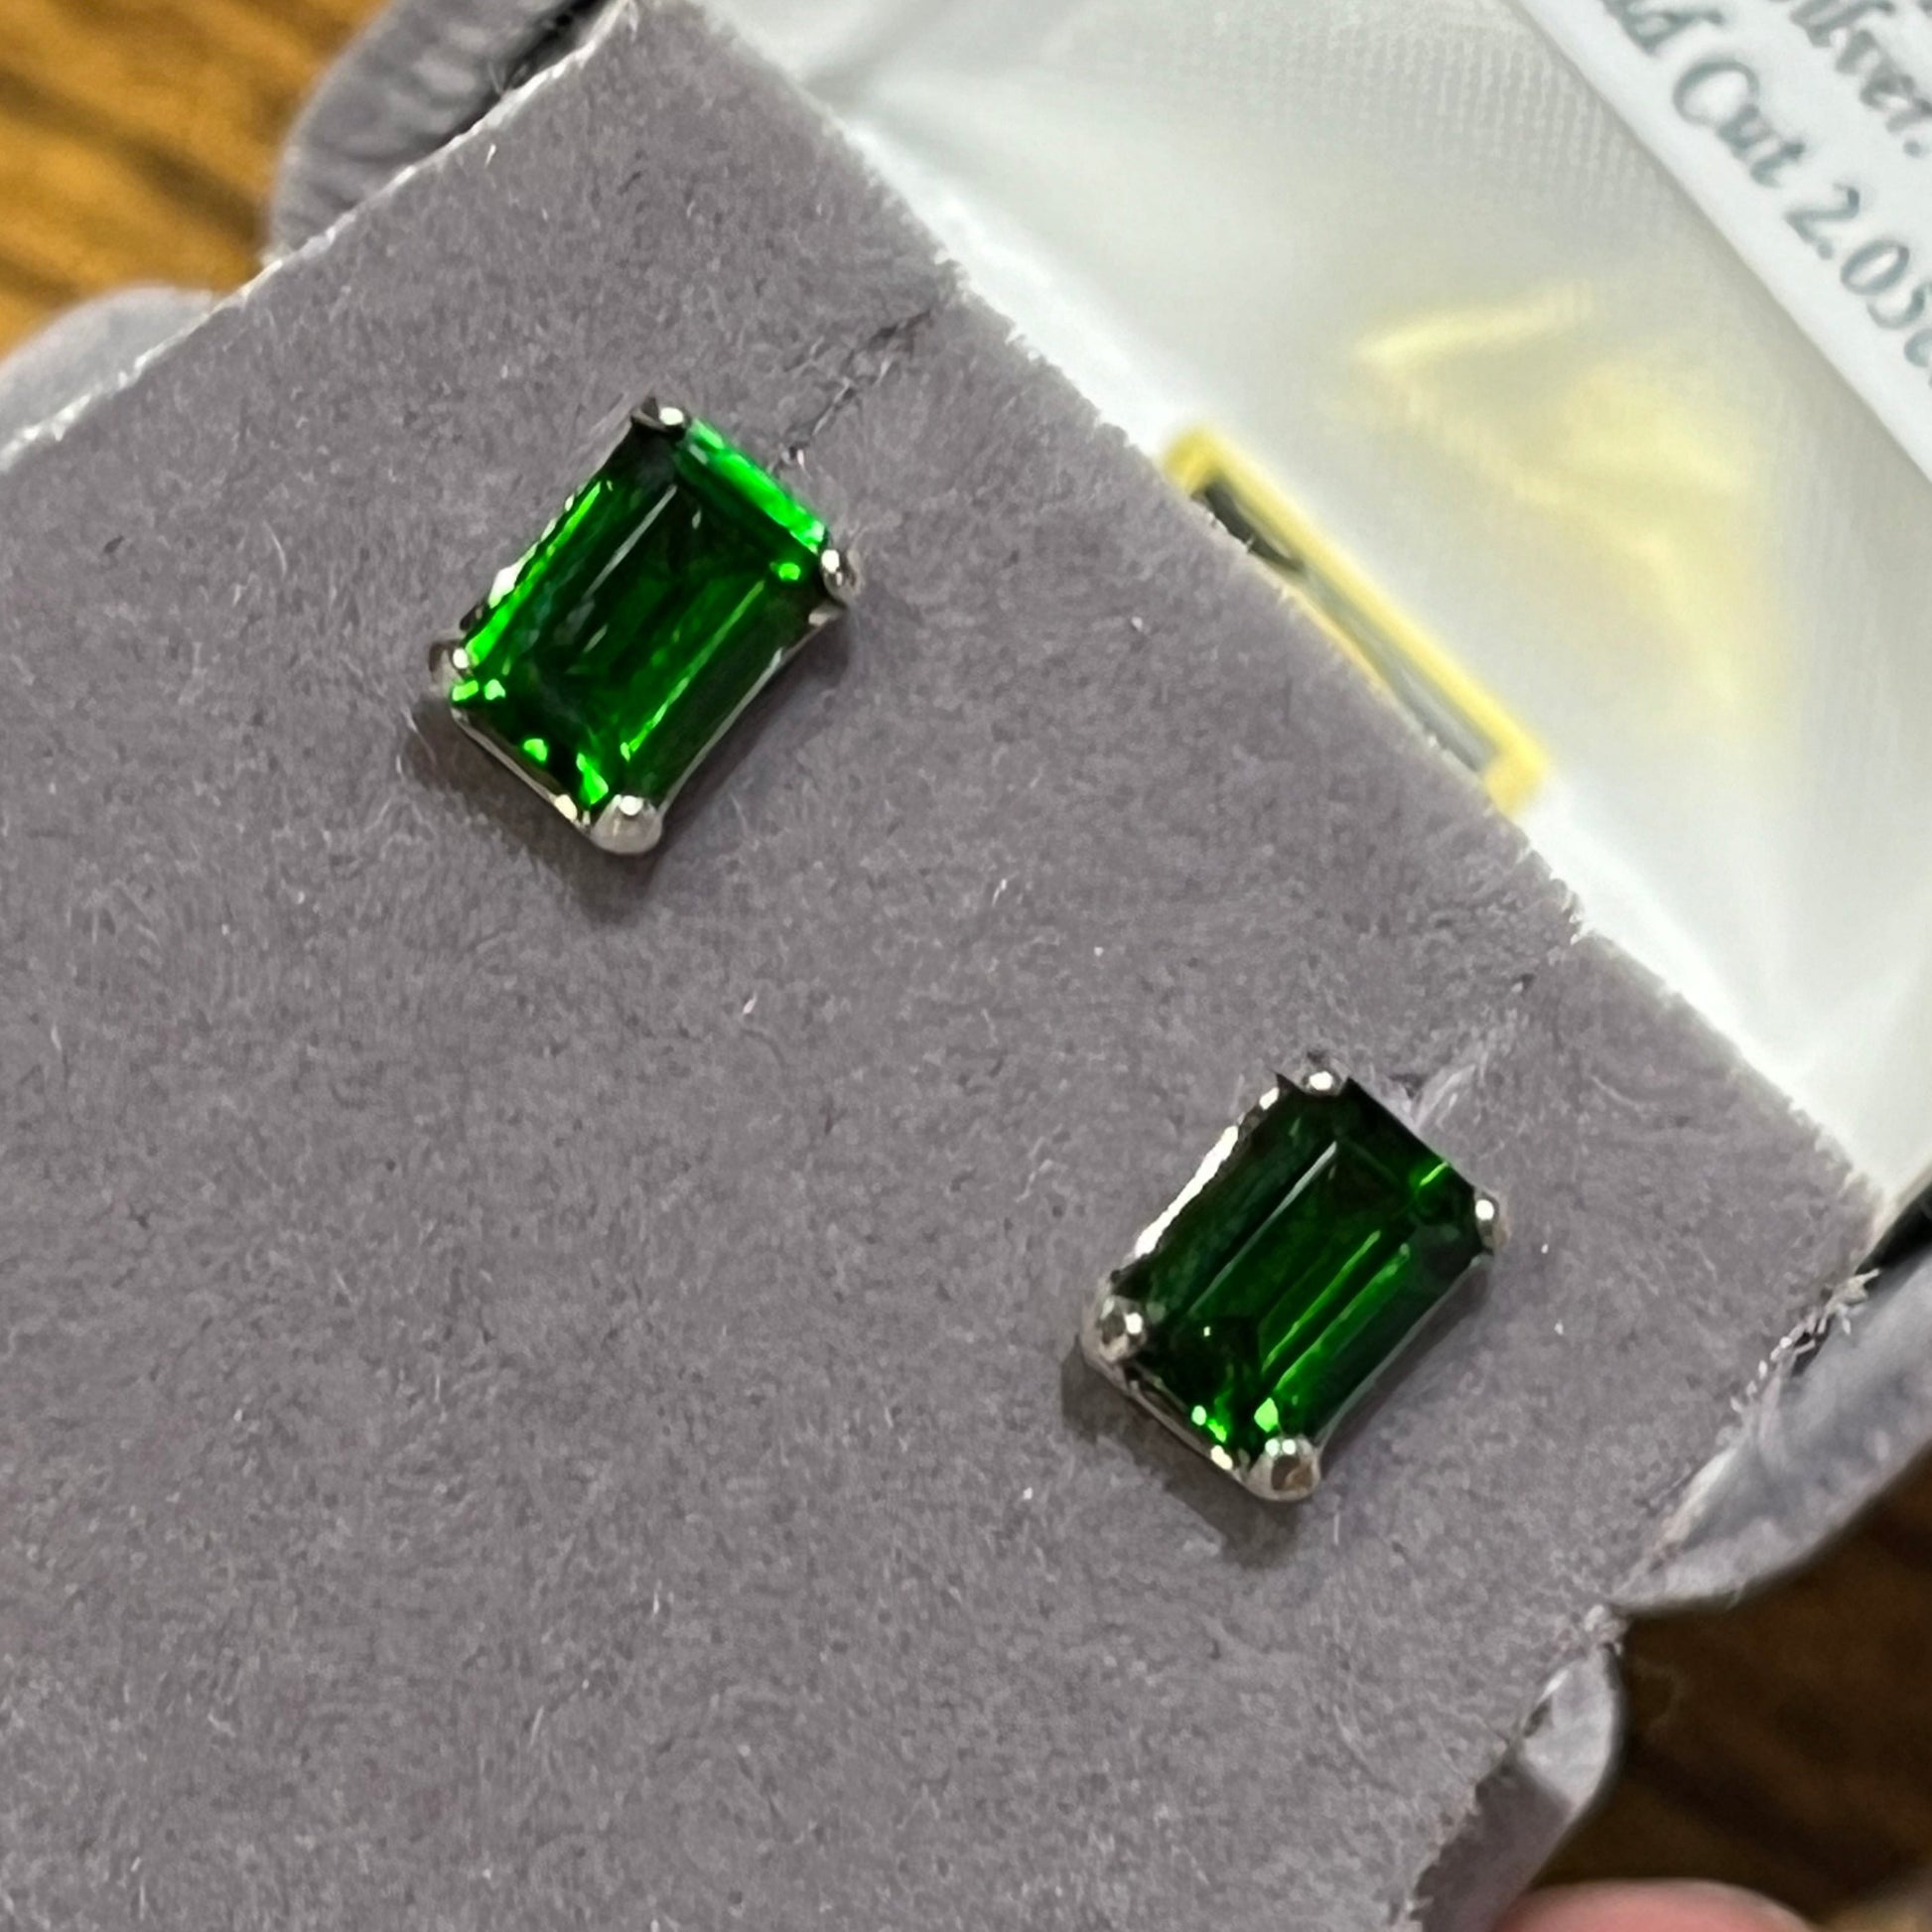 Chrome Diopside Earrings in silver 7x5 Emerald Cut 2.05 total ctw. 